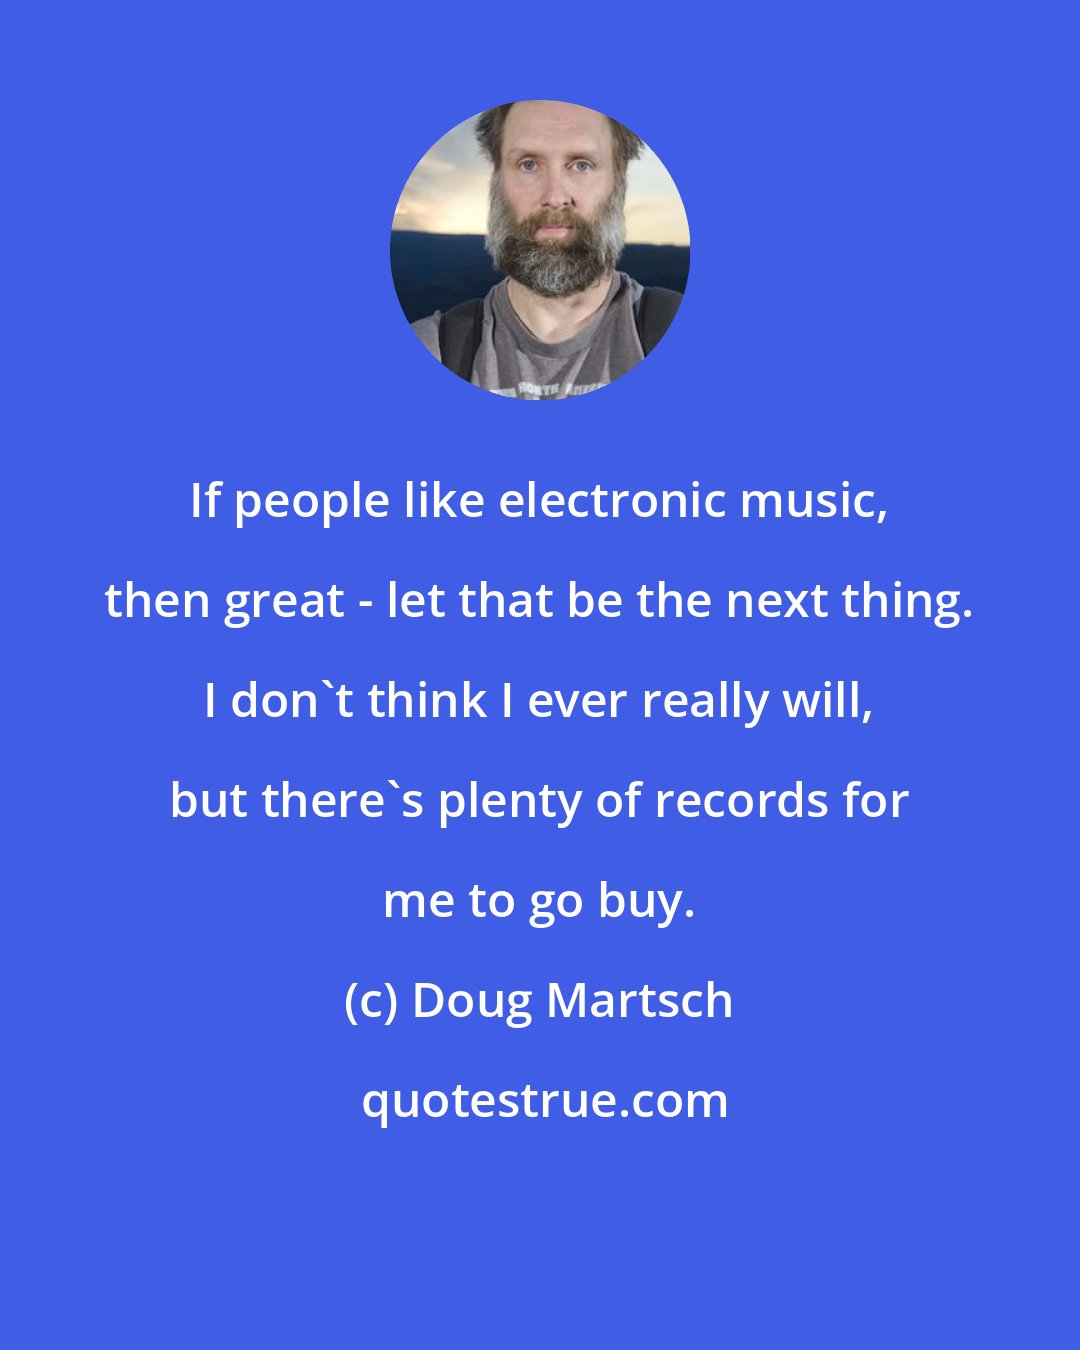 Doug Martsch: If people like electronic music, then great - let that be the next thing. I don't think I ever really will, but there's plenty of records for me to go buy.